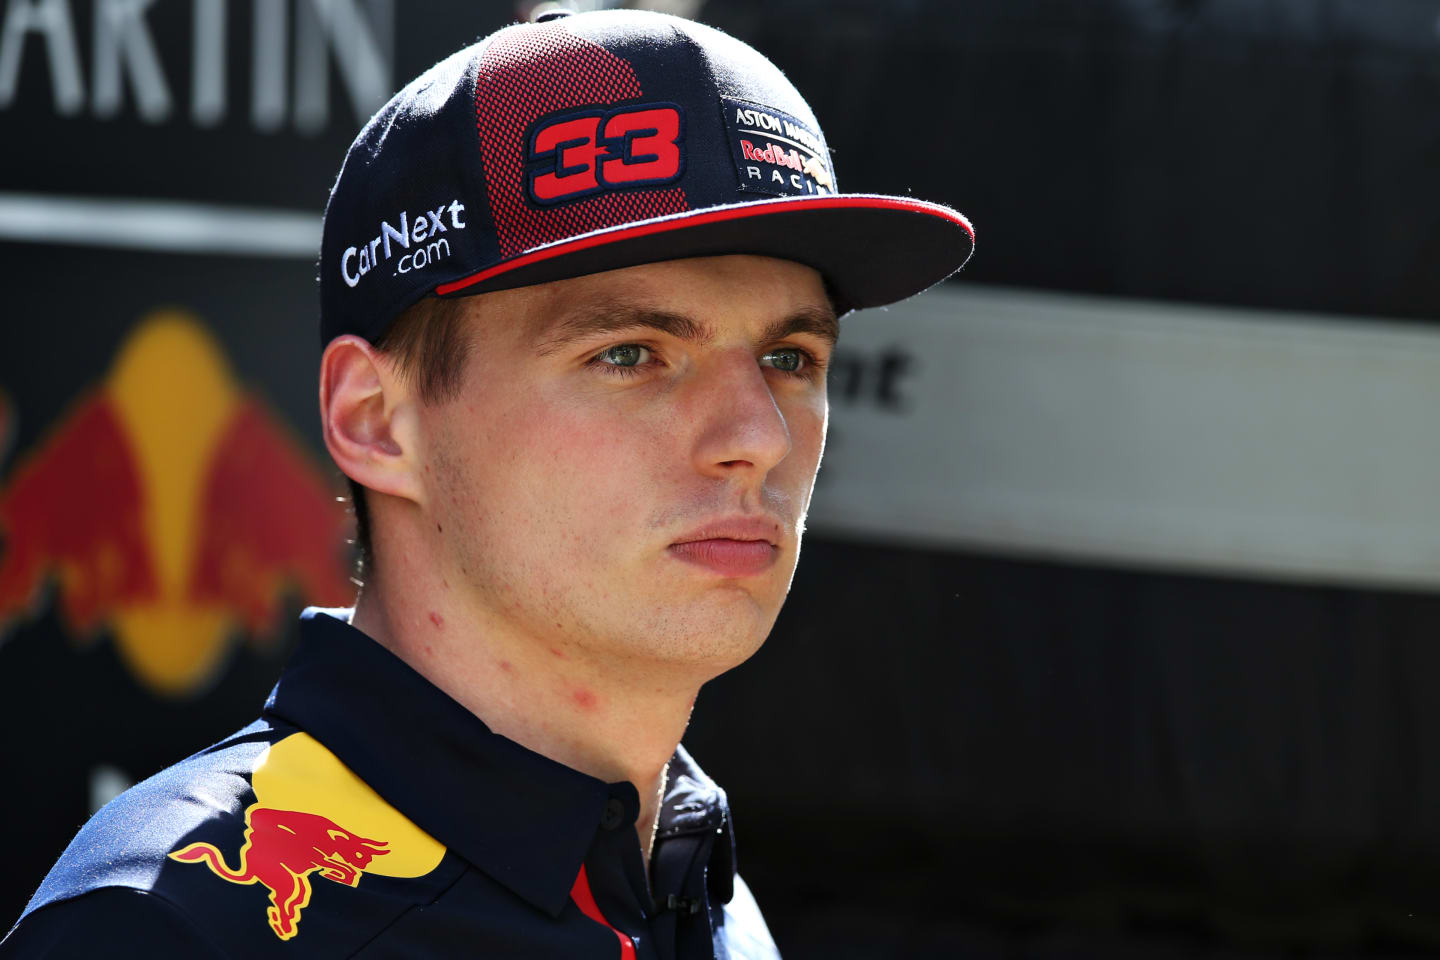 MELBOURNE, AUSTRALIA - MARCH 12: Max Verstappen of Netherlands and Red Bull Racing looks on in the